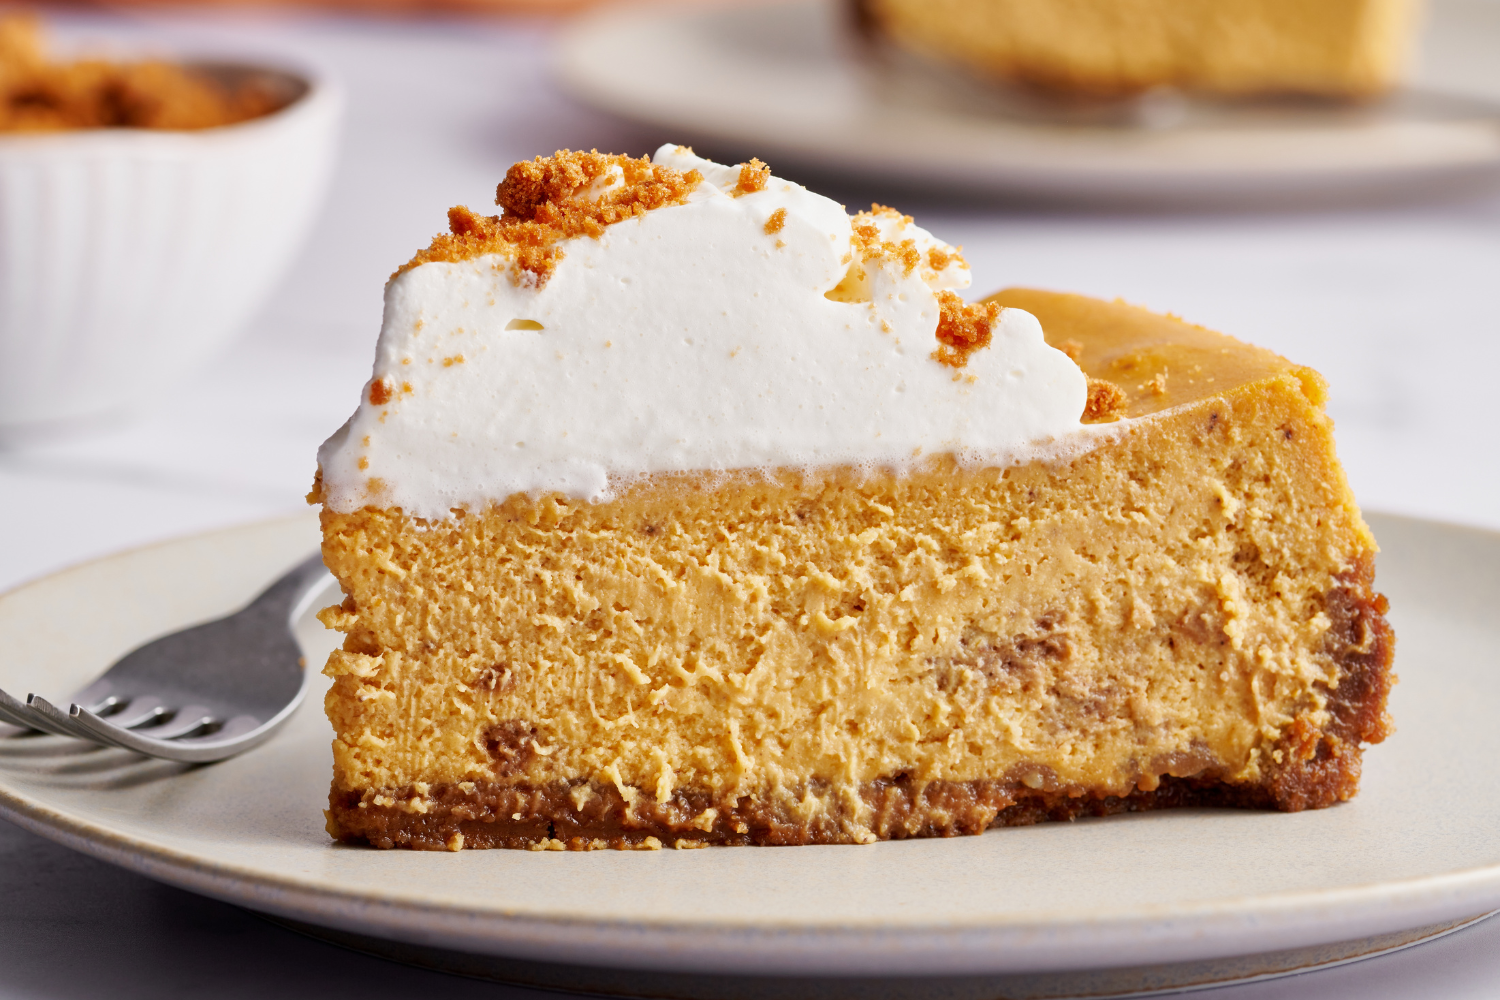 slice of pumpkin pie cheesecake, topped with whipped cream, ready to serve at Thanksgiving or any other Fall gathering!